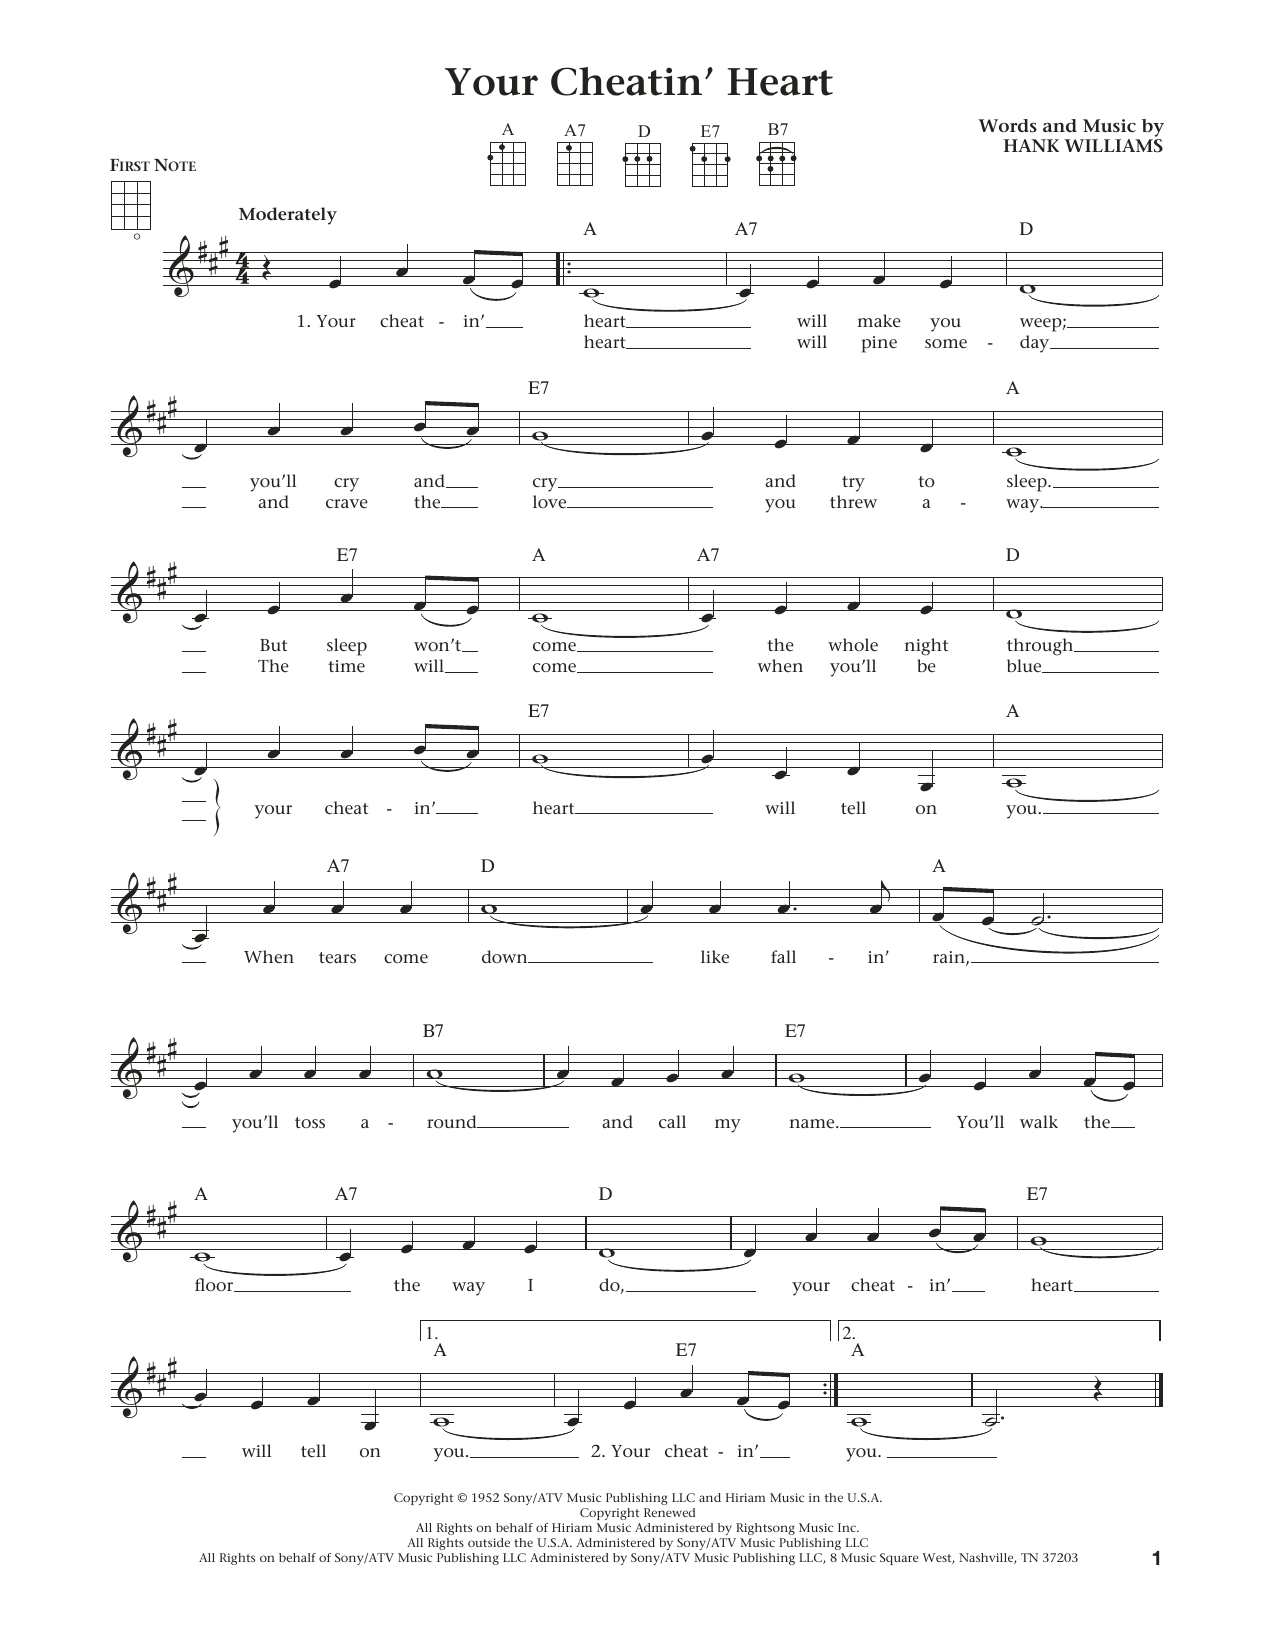 Download Hank Williams Your Cheatin' Heart (from The Daily Uku Sheet Music